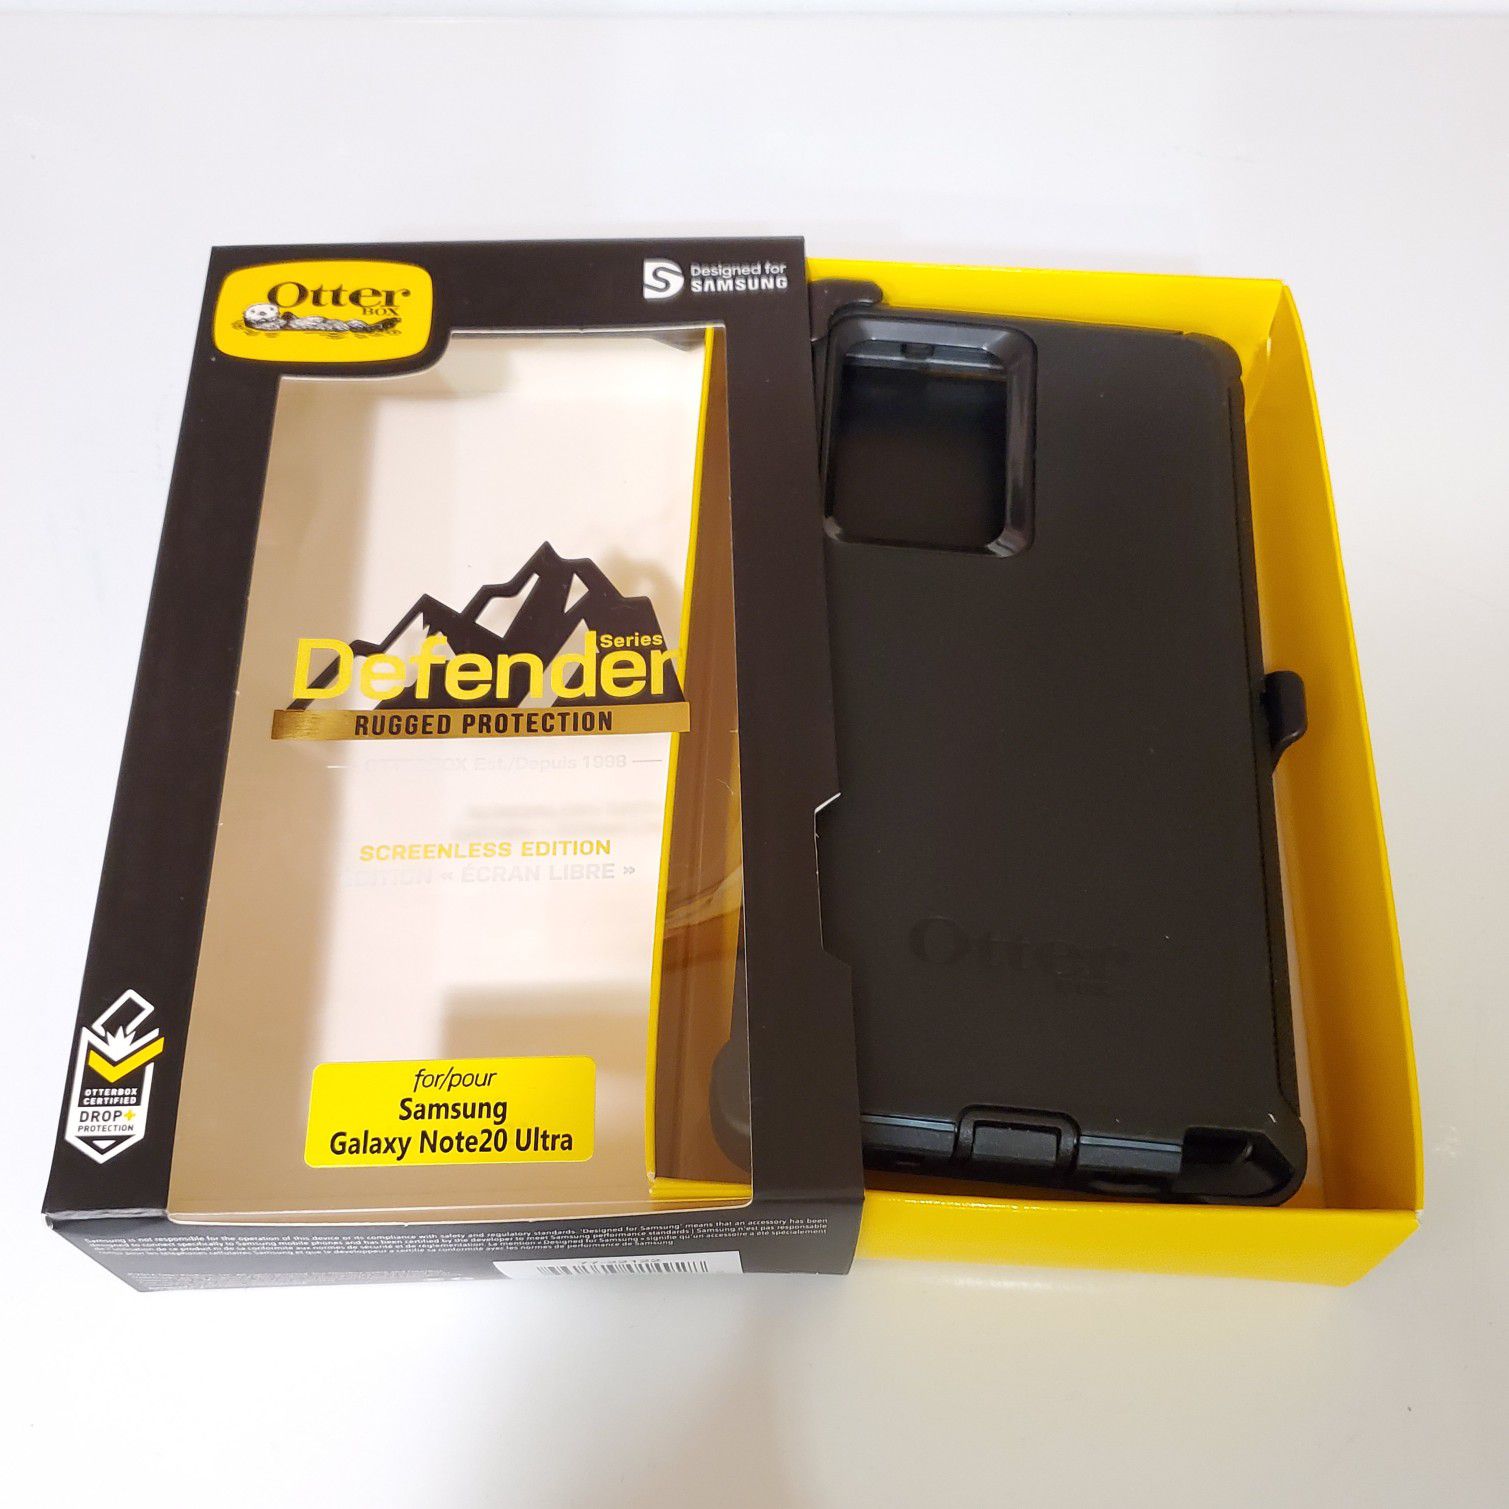 Samsung Galaxy Note 20 Ultra Otterbox Defender Series Case with belt clip holster